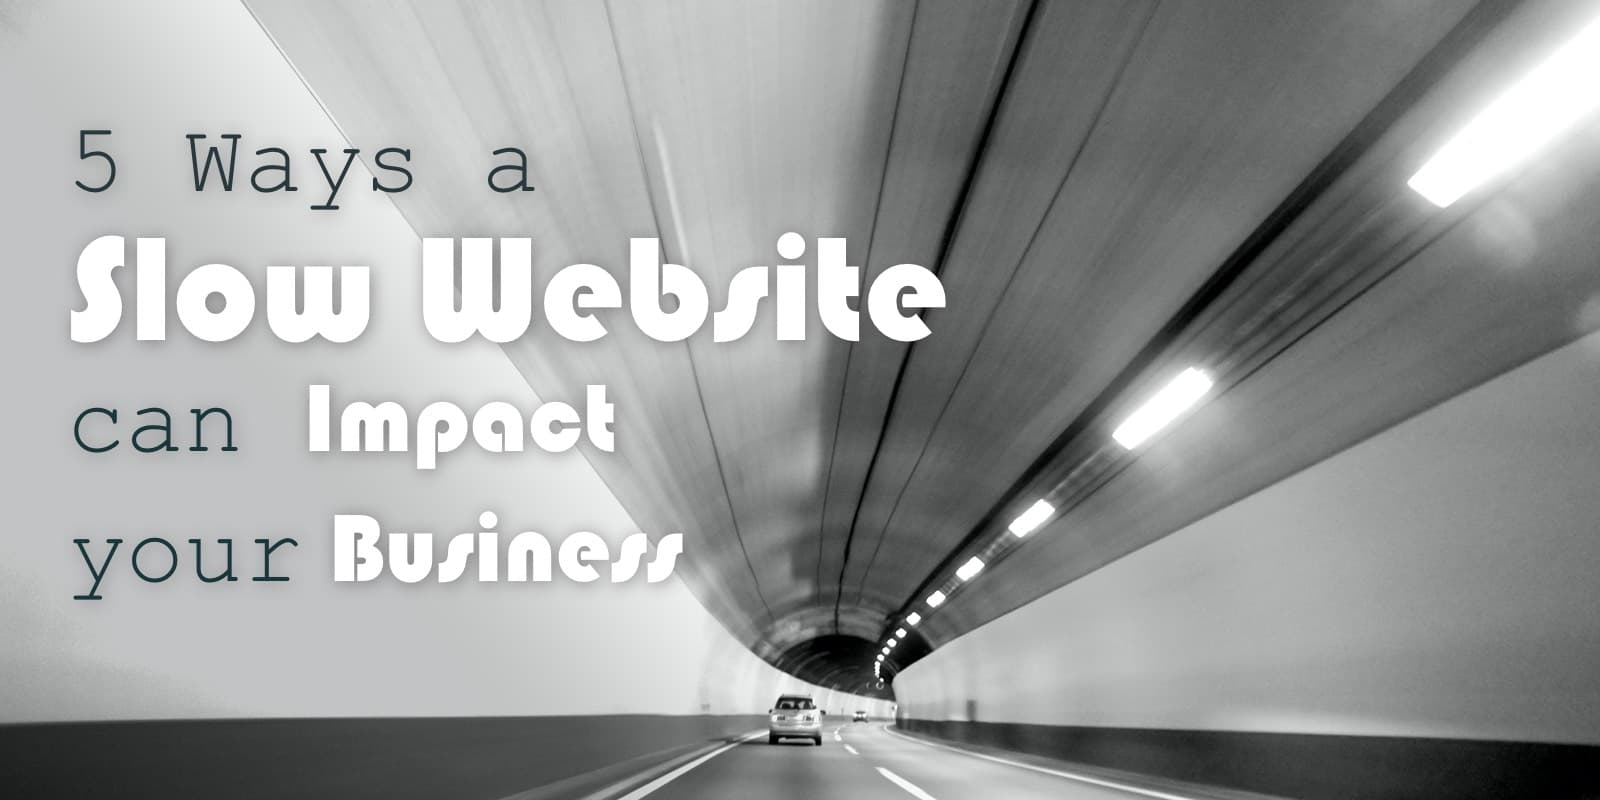 5 Ways a Slow WordPress Website Can Impact Your Business